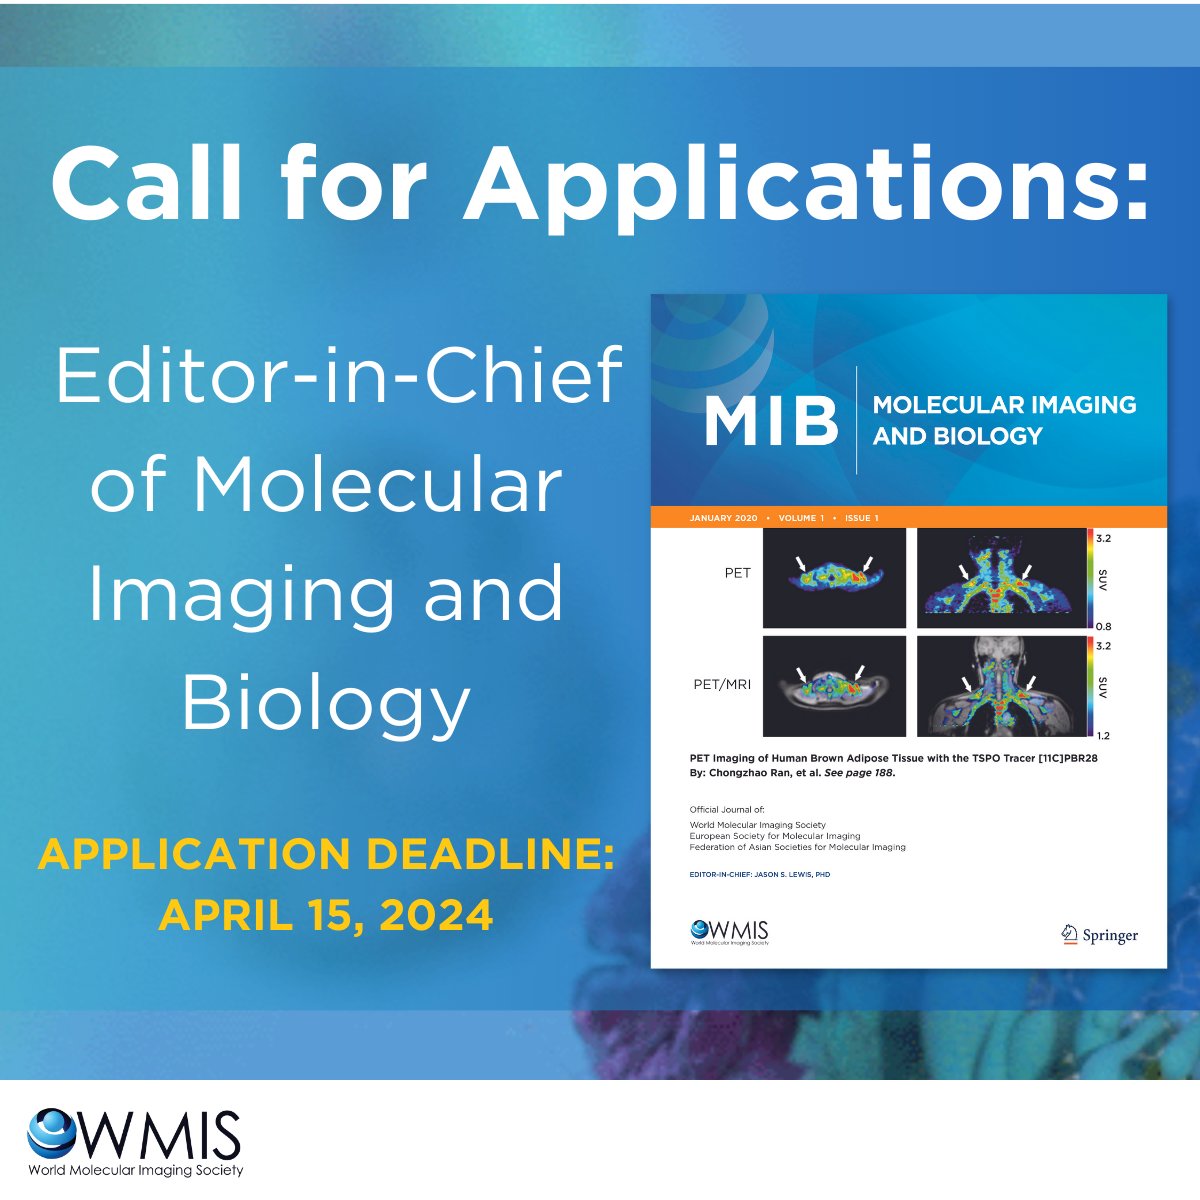 Deadline extended to April 15, 2024 for Editor-in-Chief applications of Molecular Imaging and Biology (#MIB). Exceptional opportunity for a #MolecularImaging researcher to lead this esteemed @SpringerNature publication. More information and apply at wmis.org/journal/eic-se…